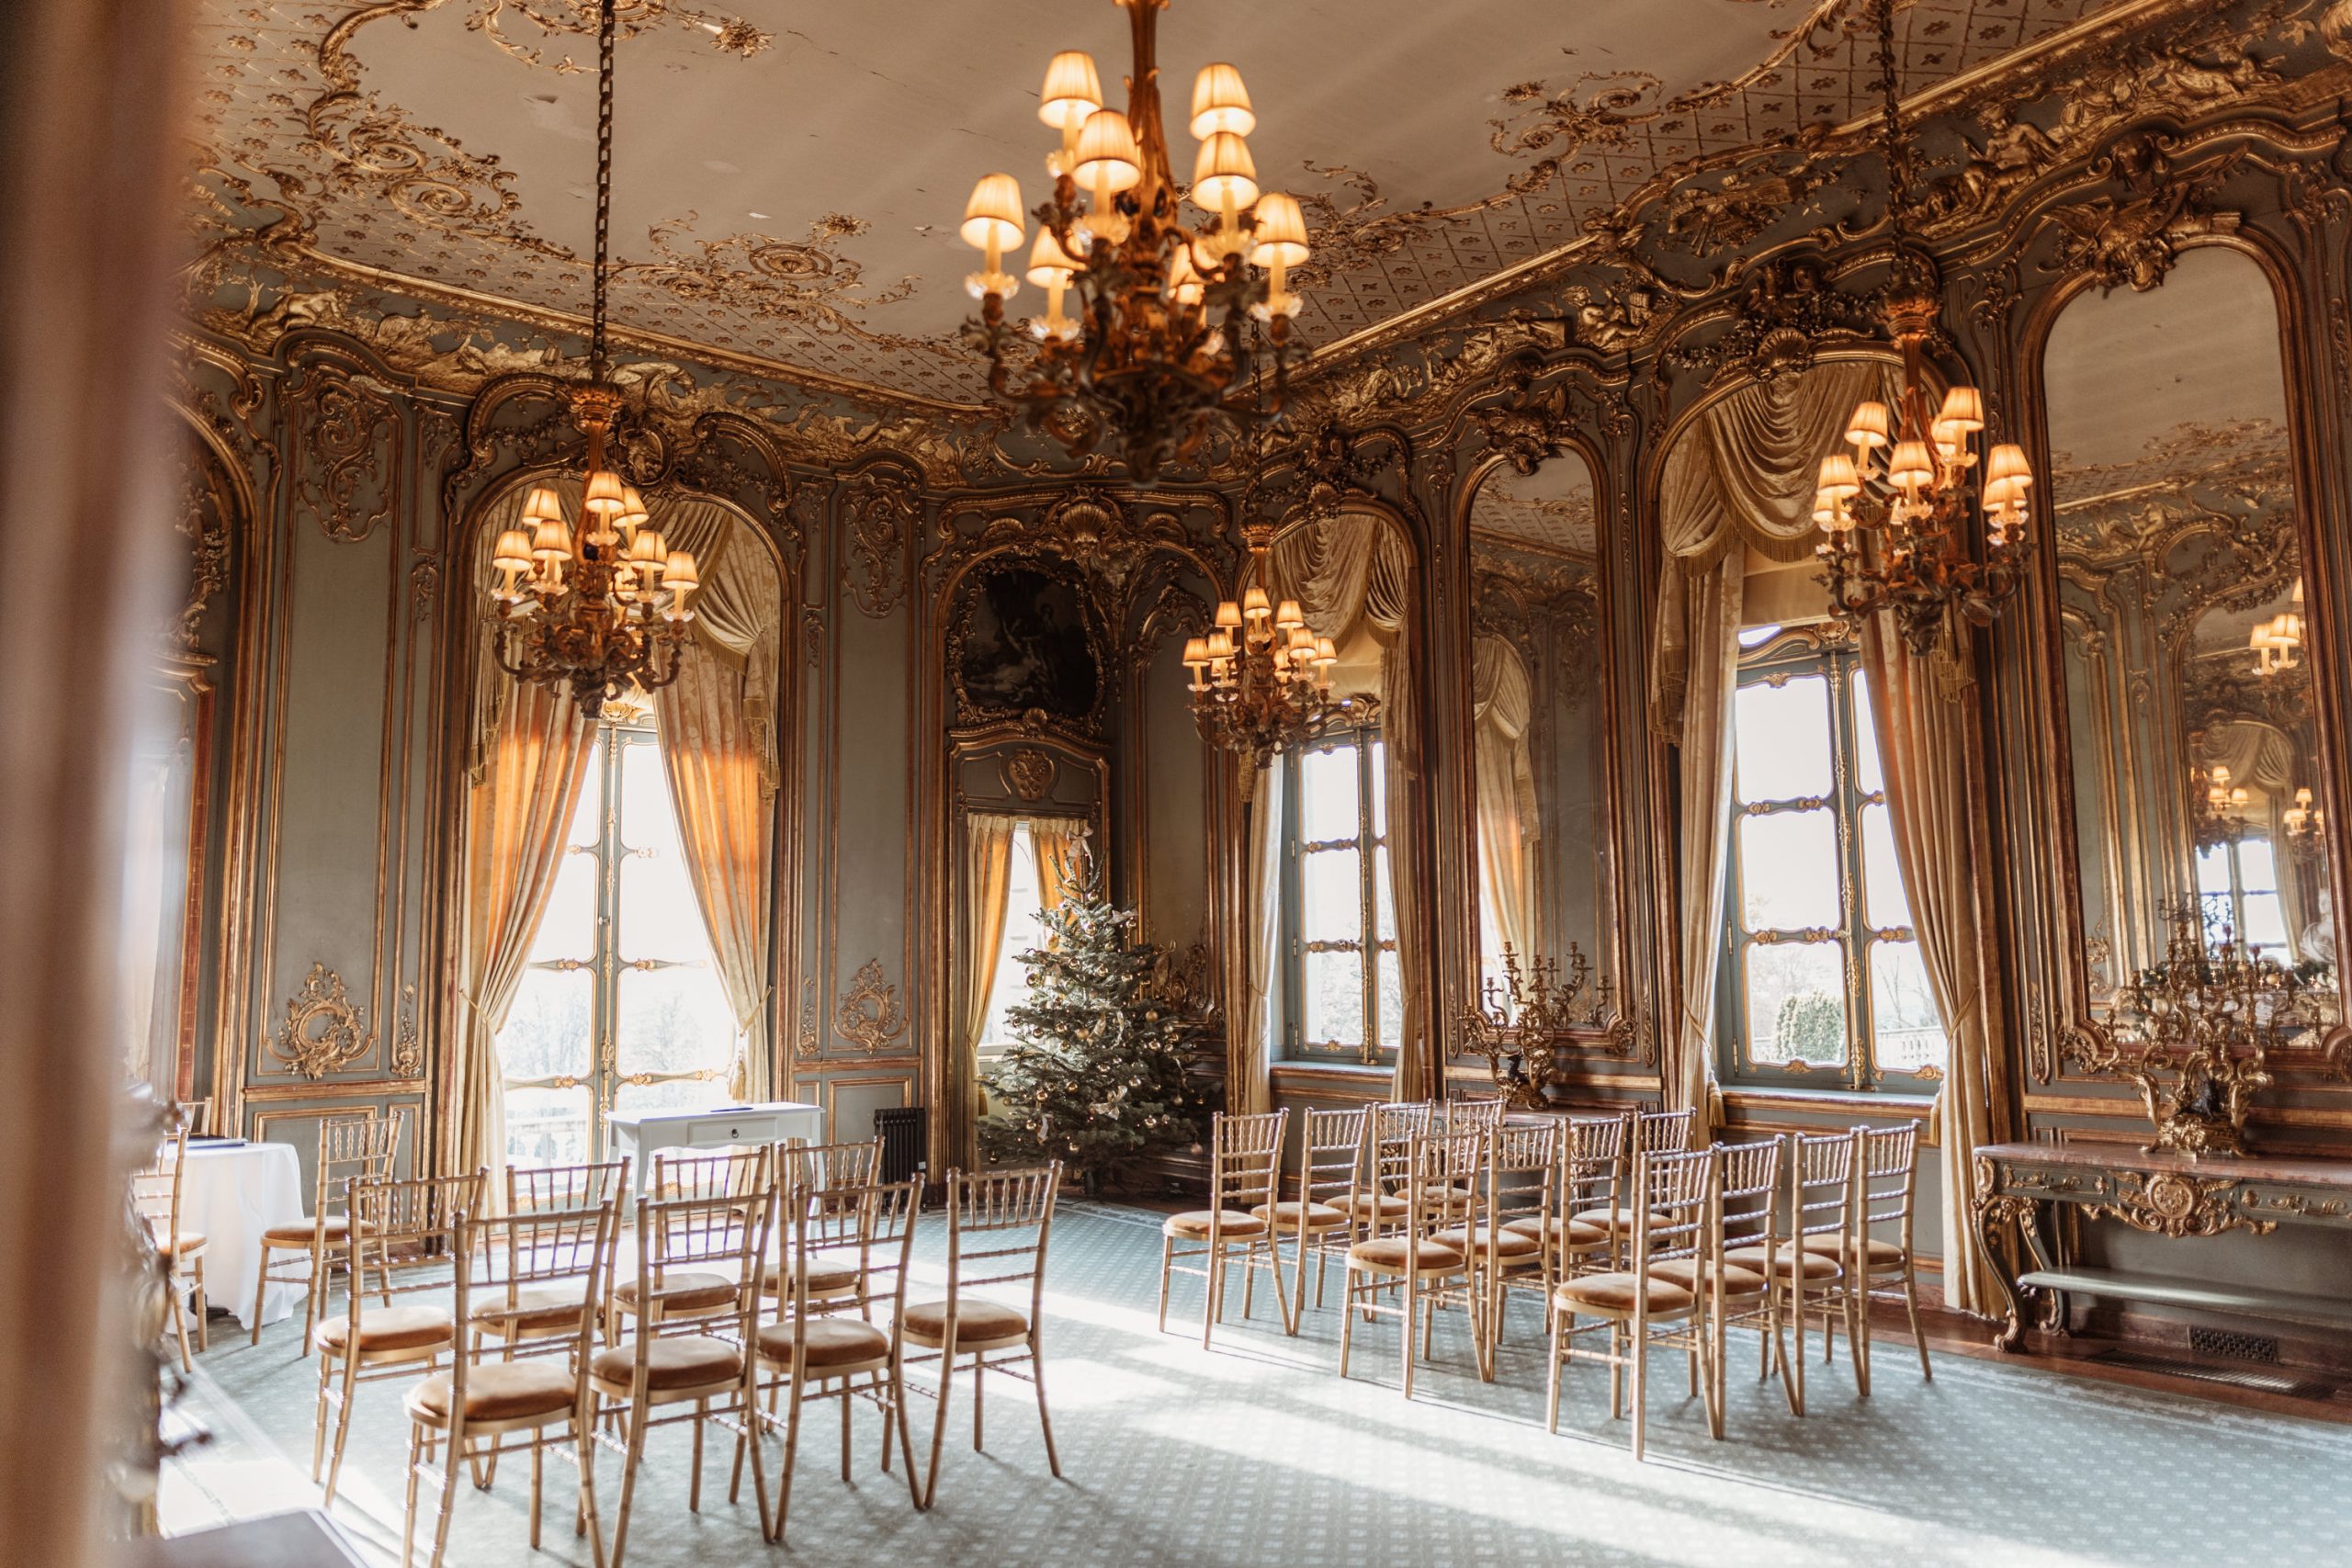 Ceremony room at Cliveden House, grand interior with lots of gold decor and chairs and chandeliers